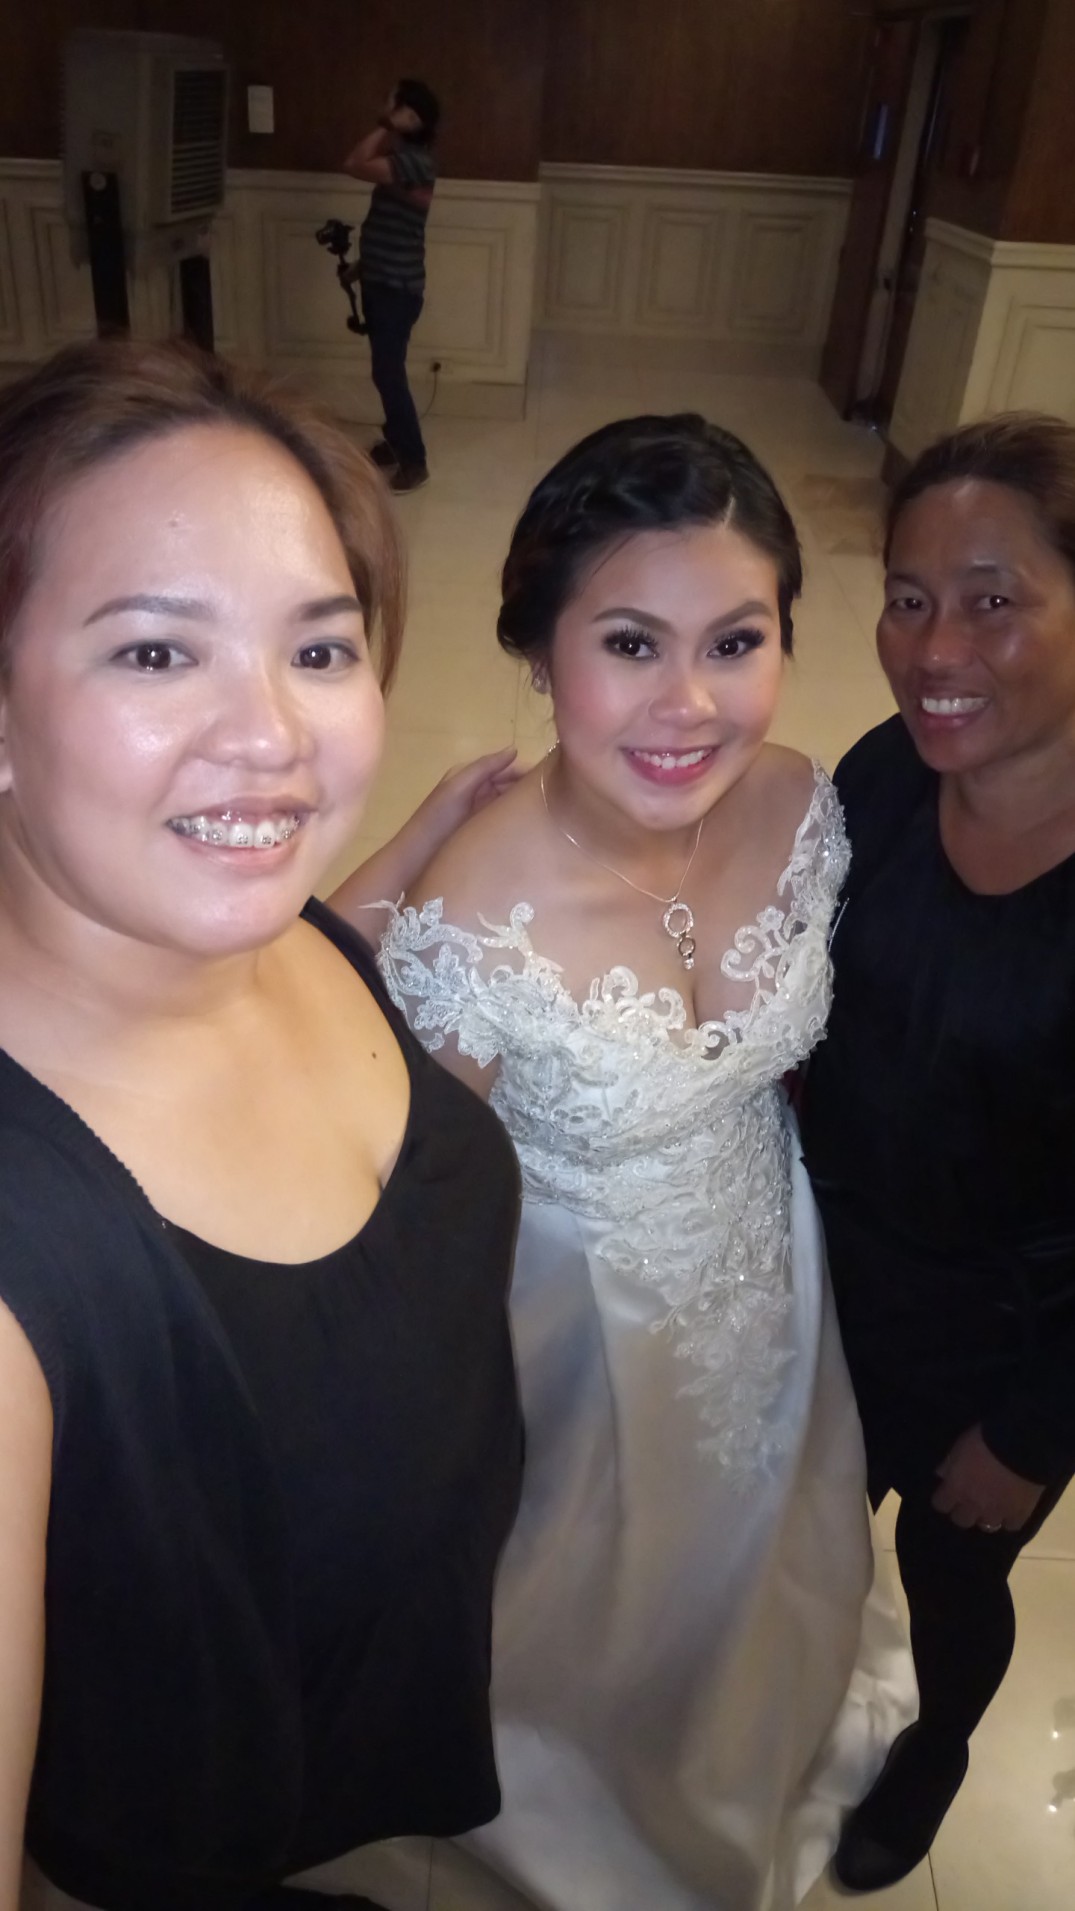 With our Bride taking a quick groupie before the start of reception.